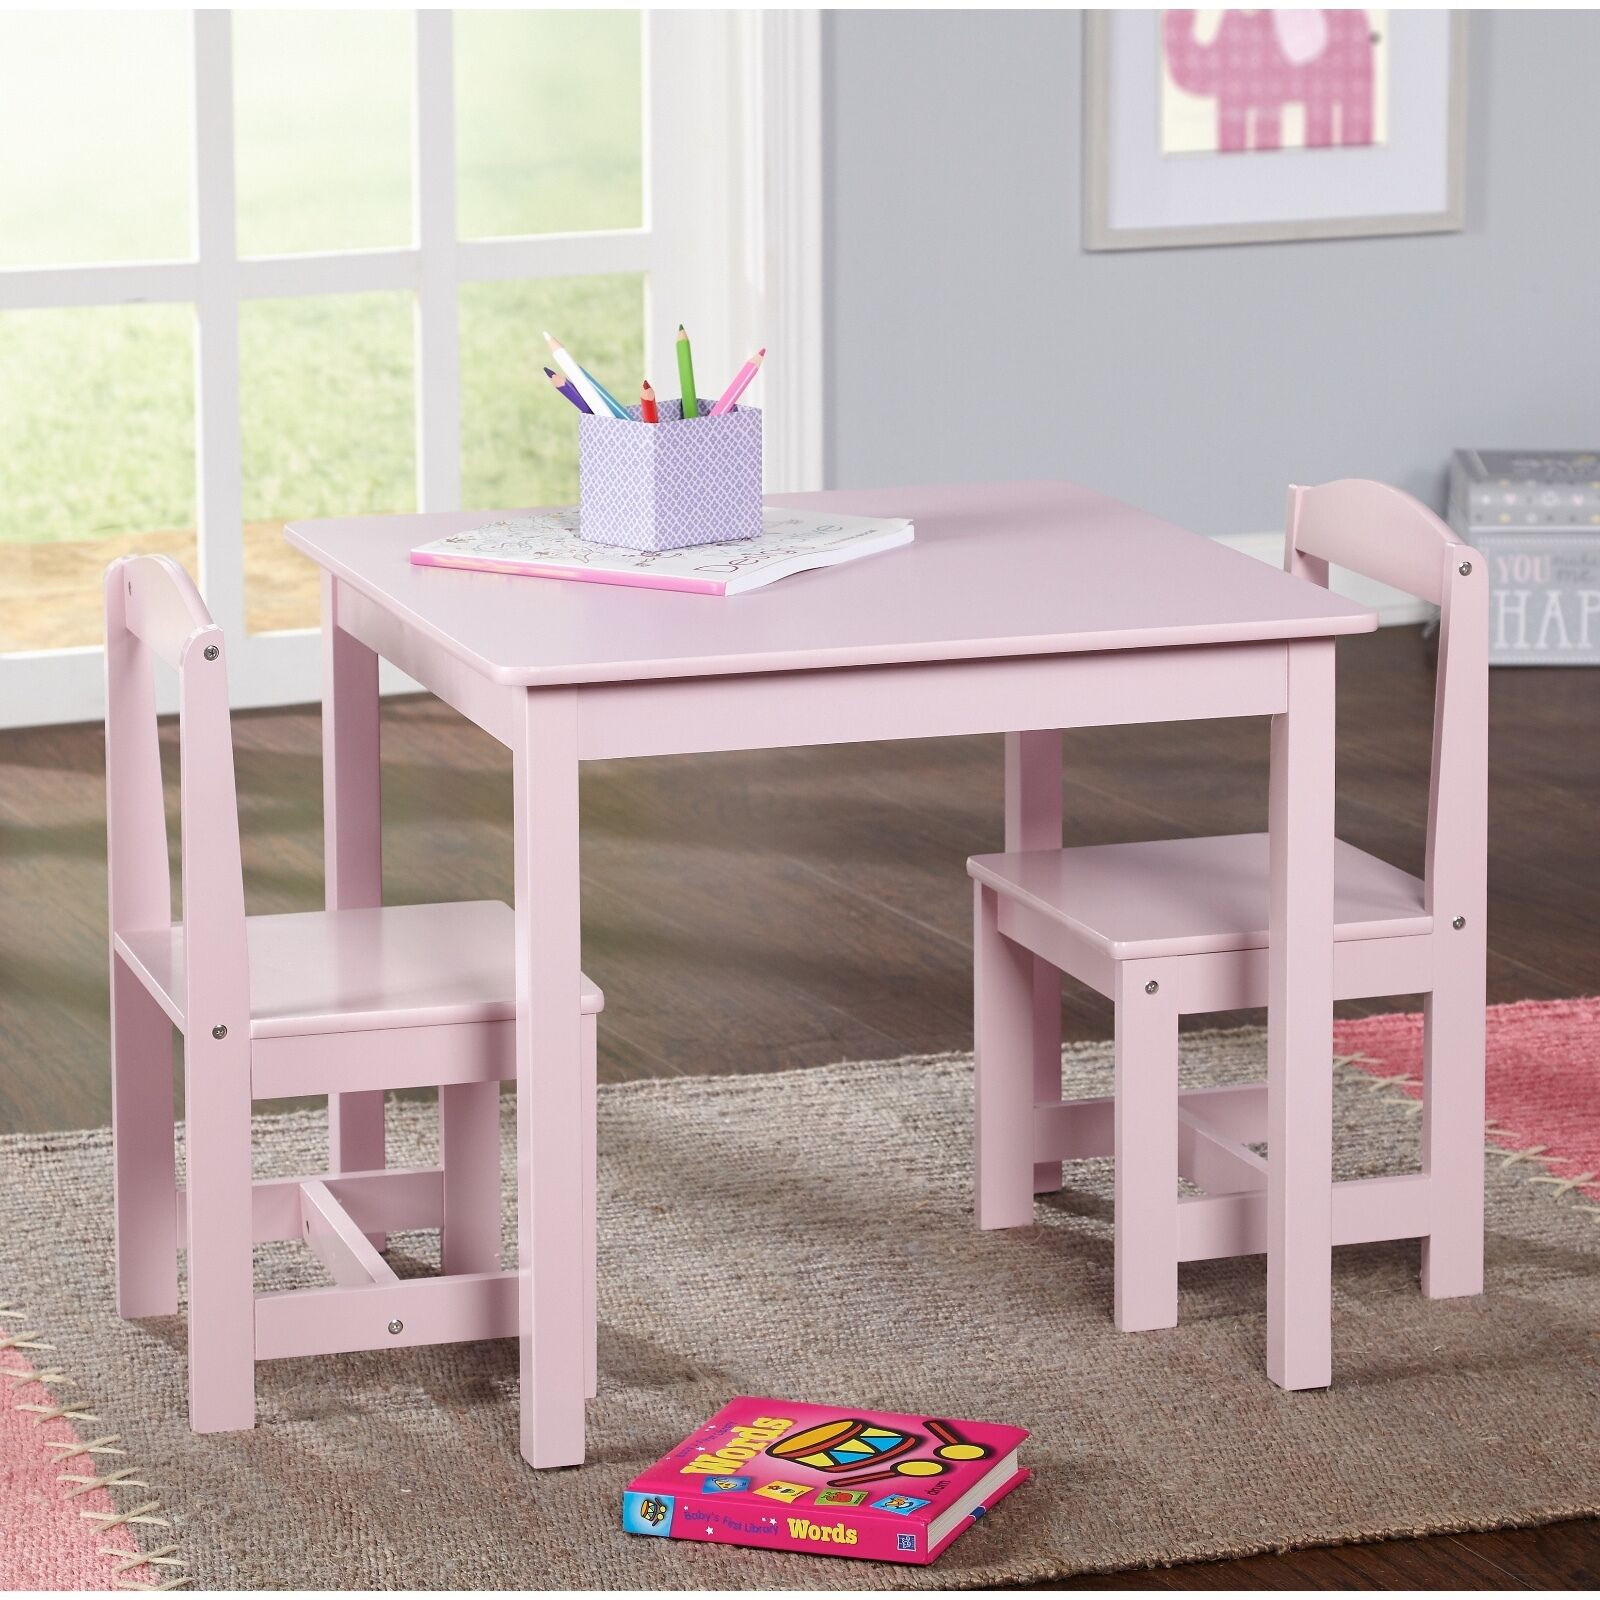 Kids Table And Chair Set
 Study Small Table and Chair Set Generic 3 Piece Wood